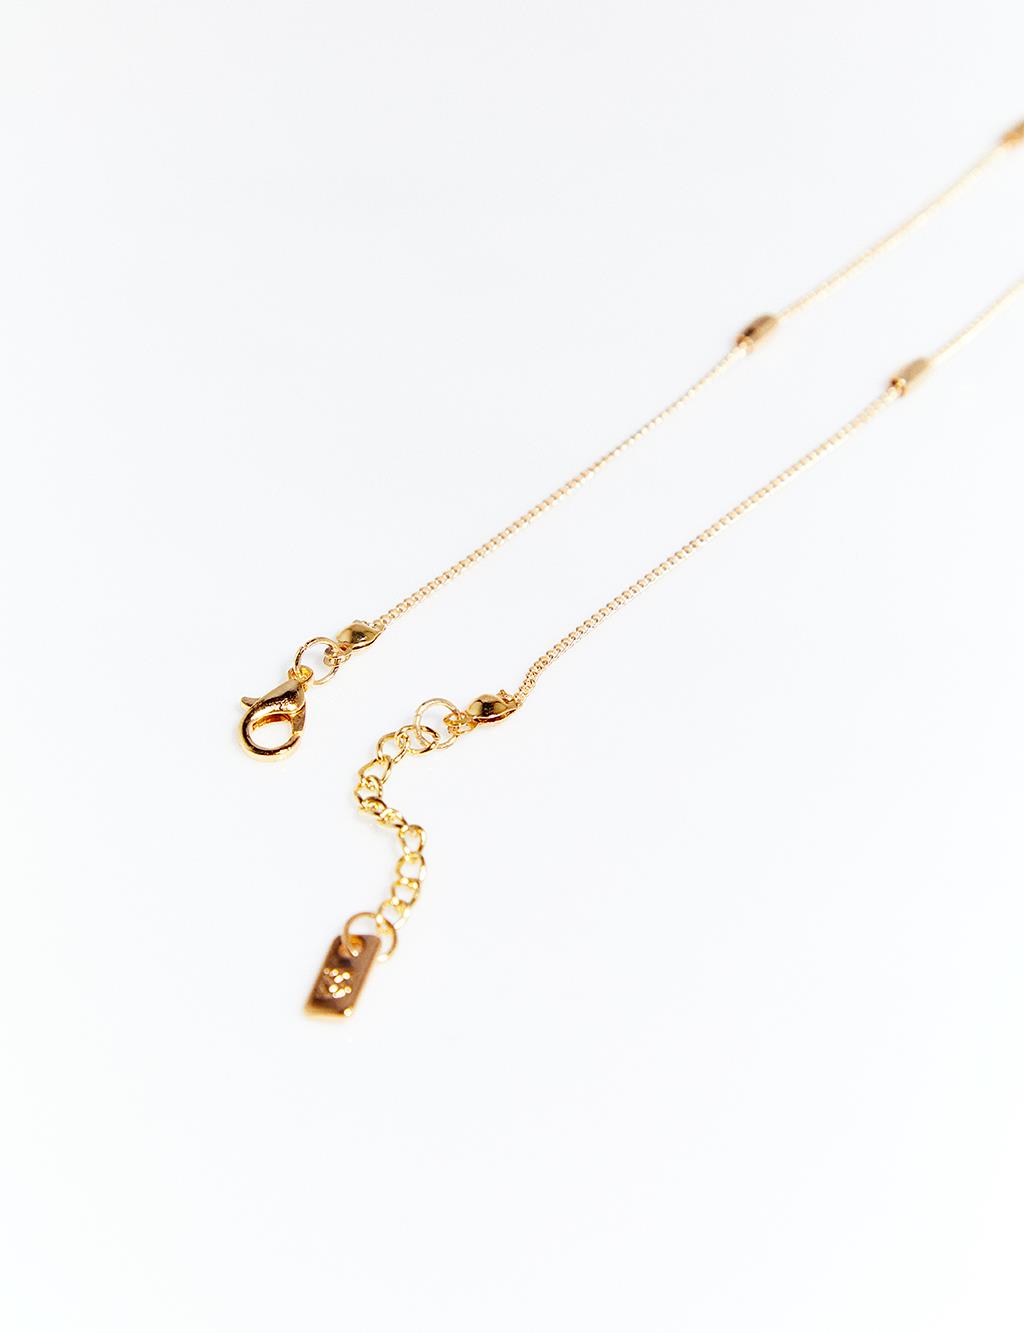 Cut Bead Detailed Necklace Gold